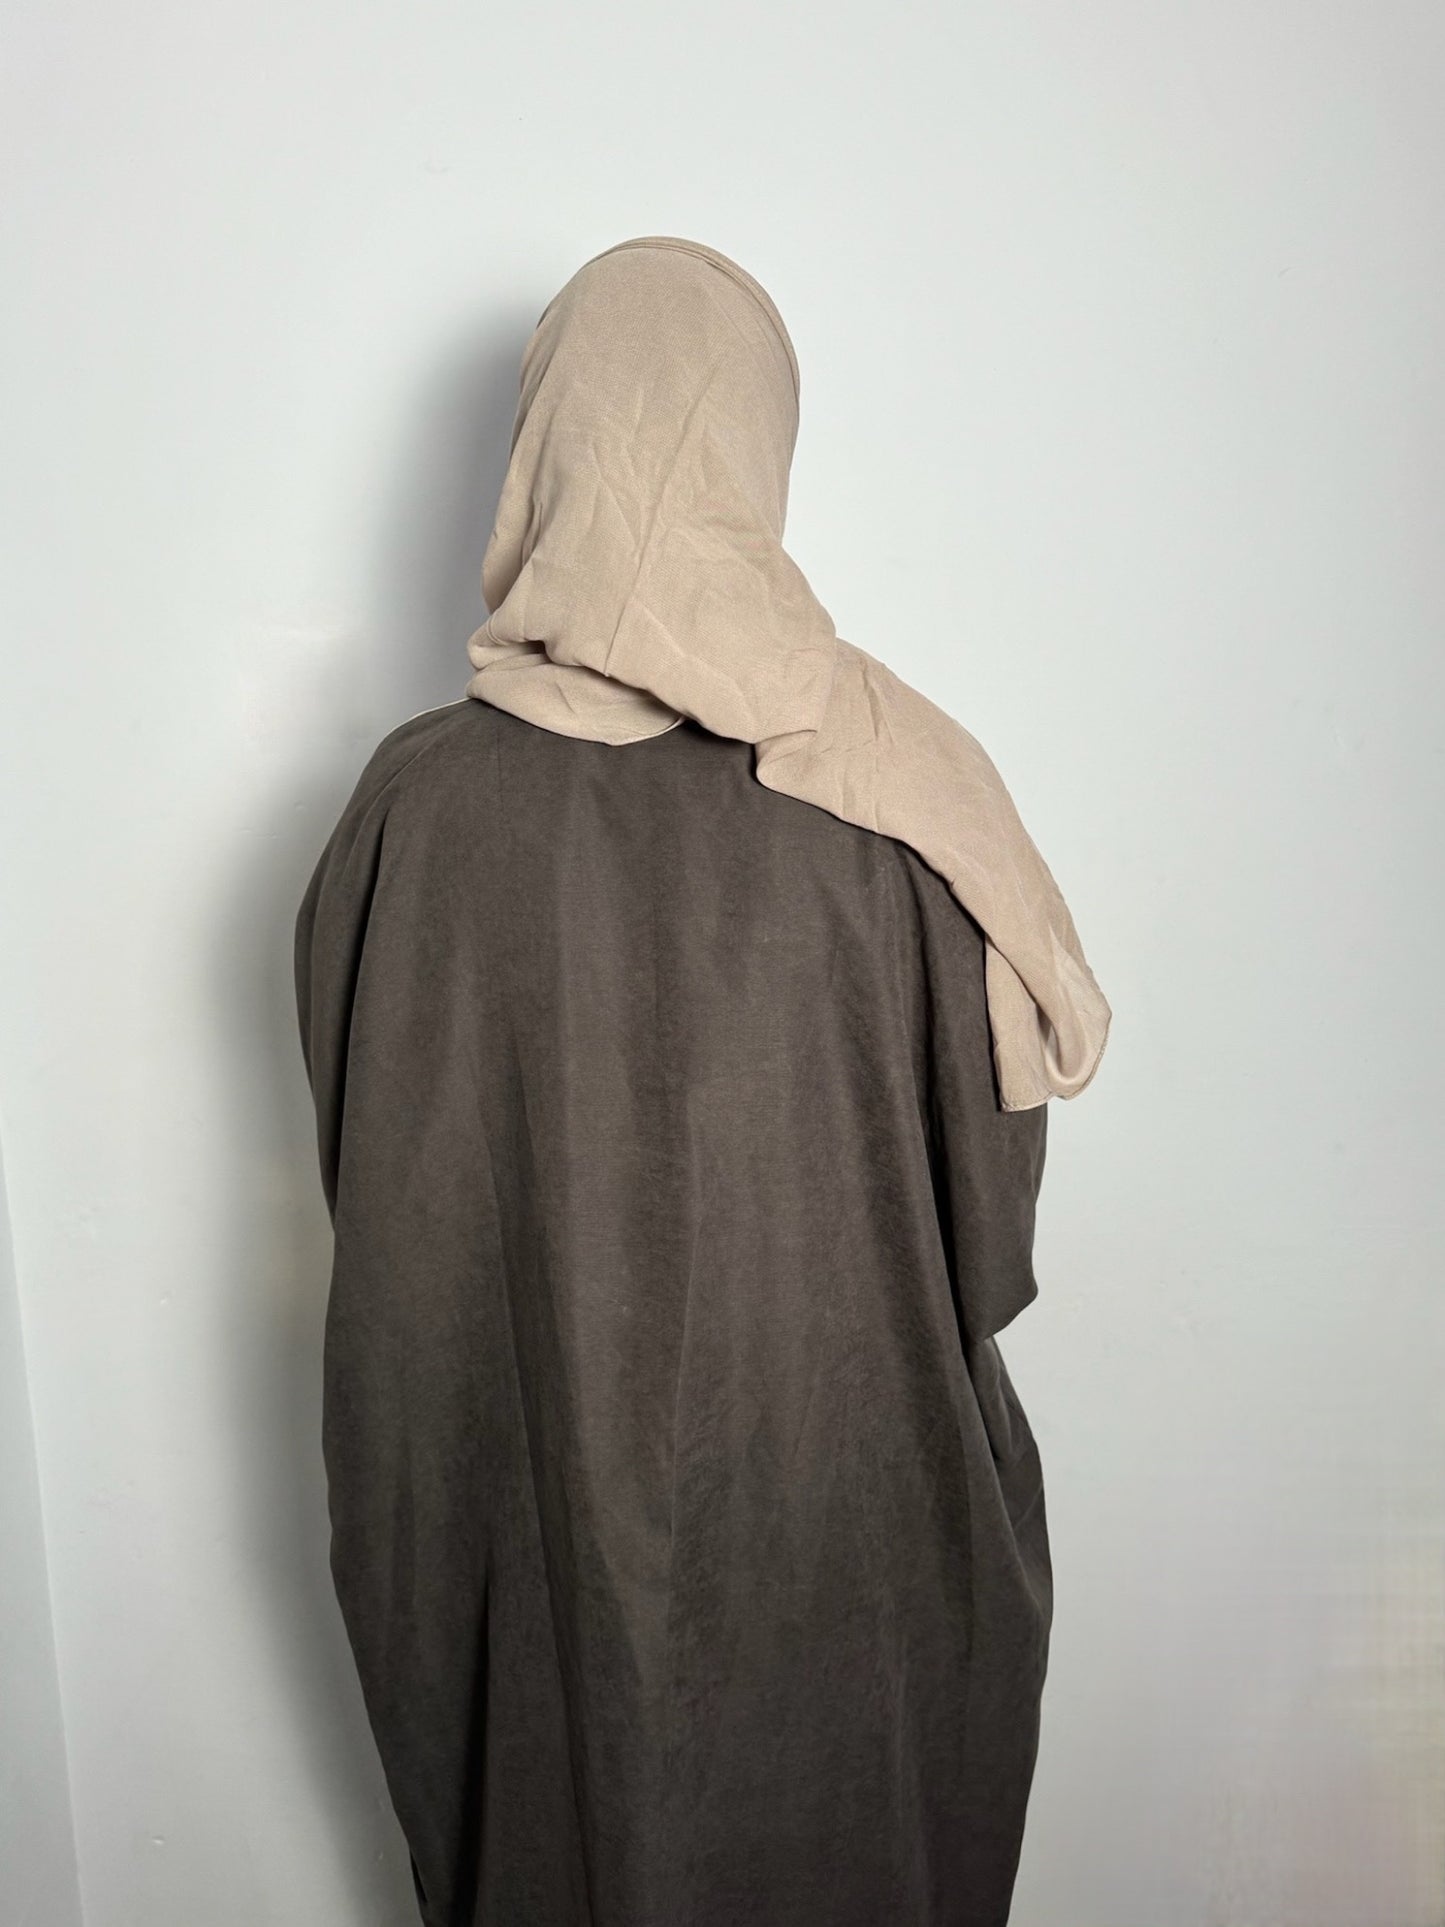 The Brown Suede Abaya